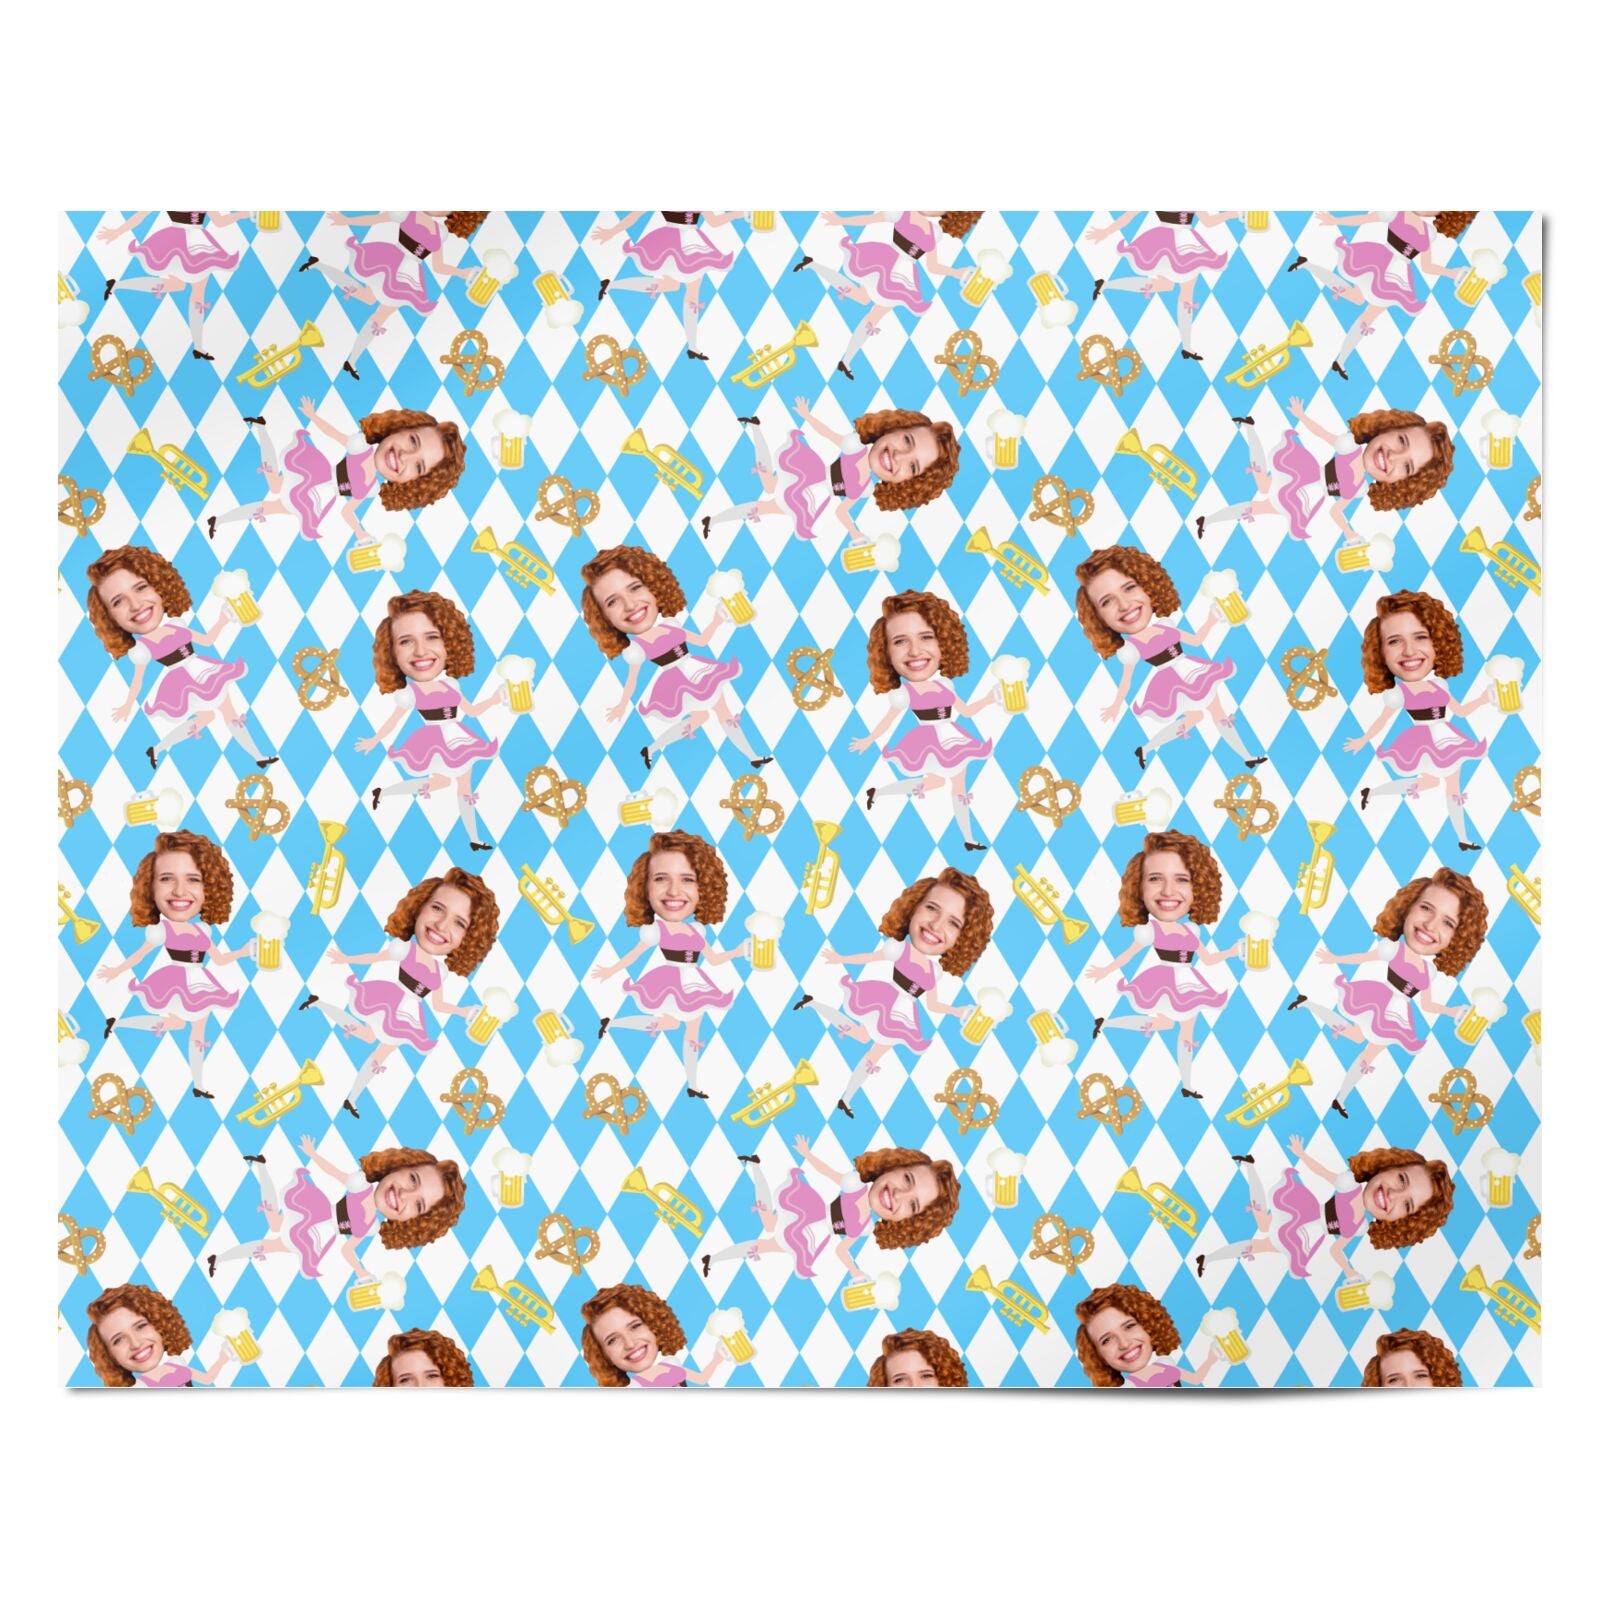 Personalised Photo Face Dirndl Oktoberfest Personalised Wrapping Paper Alternative